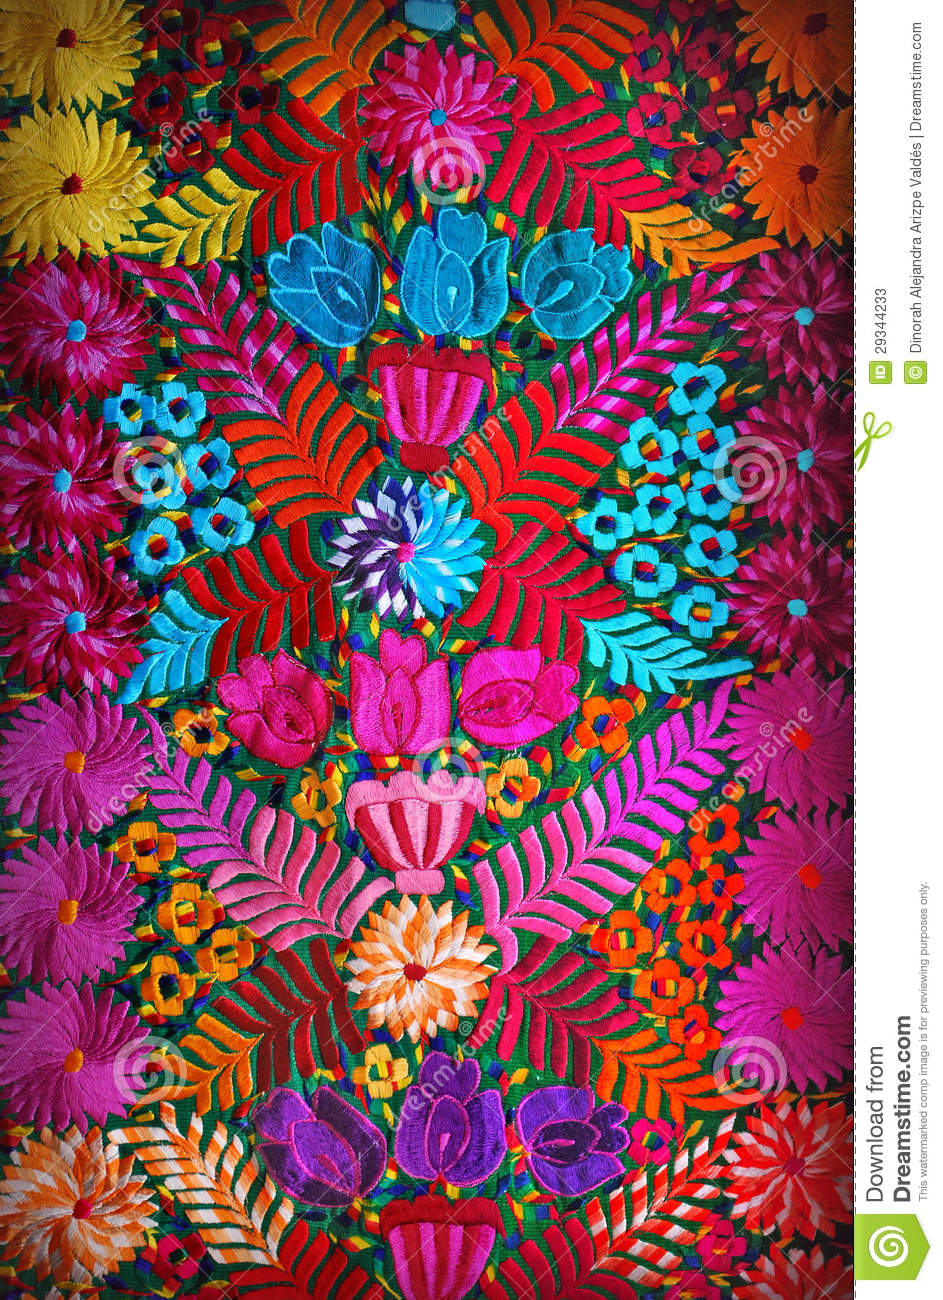 Download image Mexican Floral Embroidery Designs PC Android iPhone